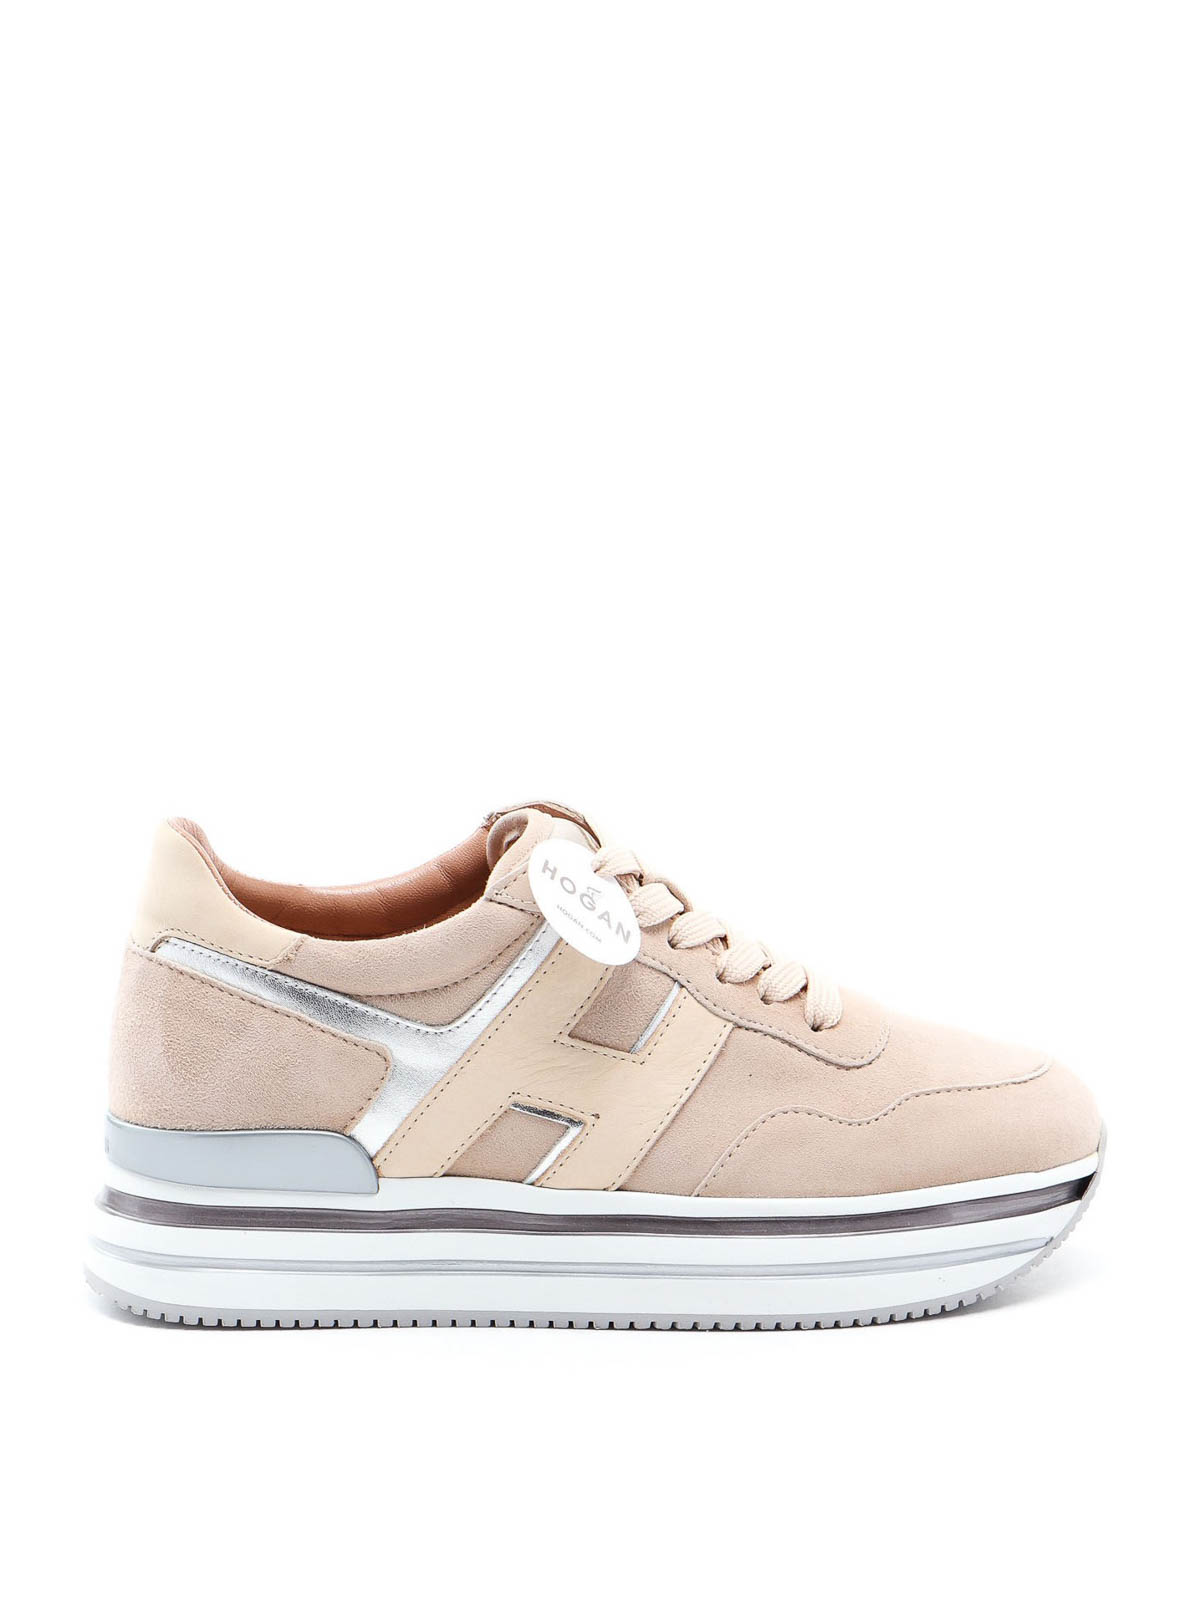 HOGAN H483 NUBUCK AND LEATHER SNEAKERS